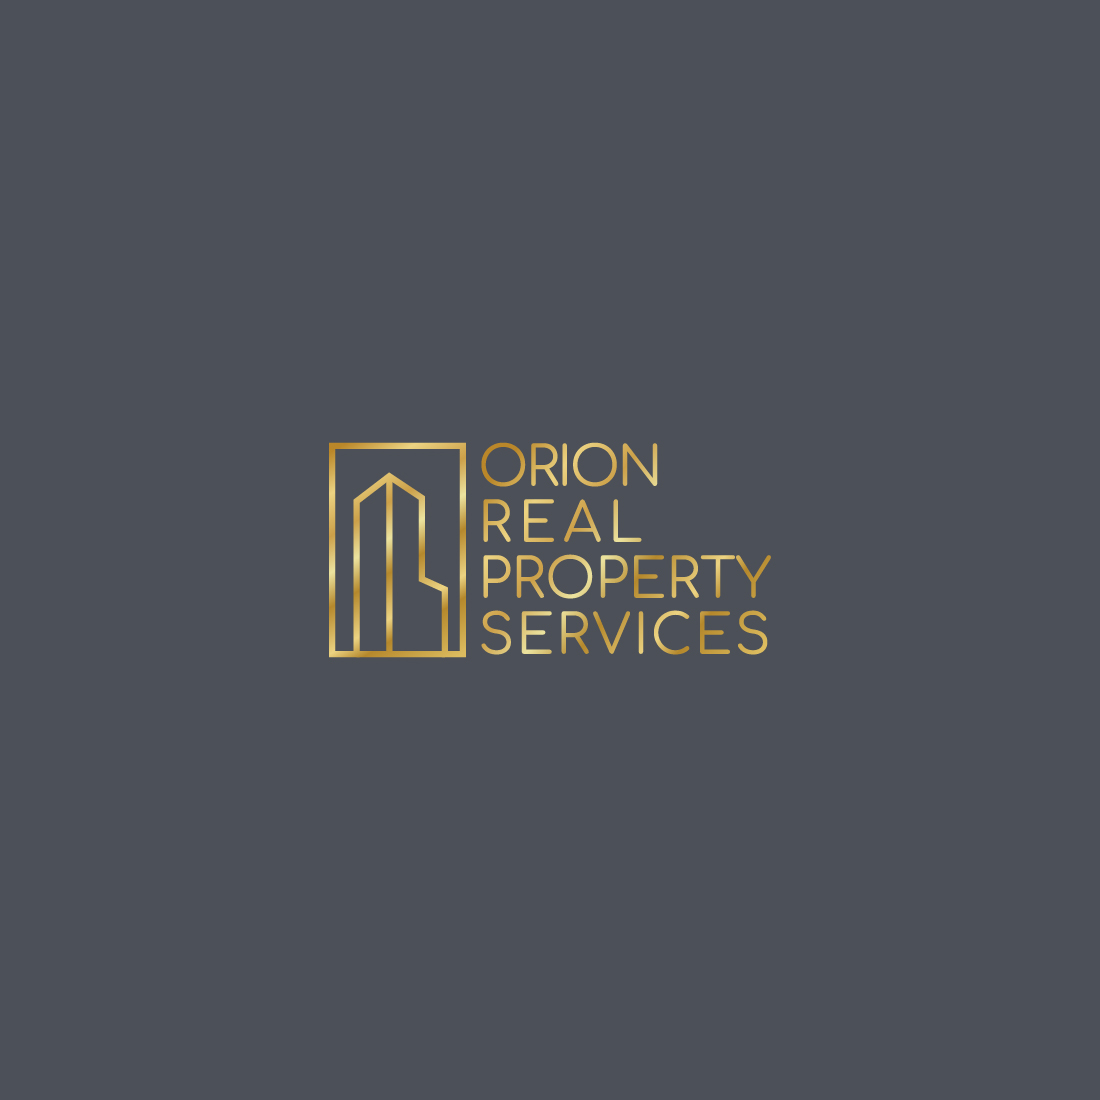 real property services logo, building logo, minimalistic logo preview image.